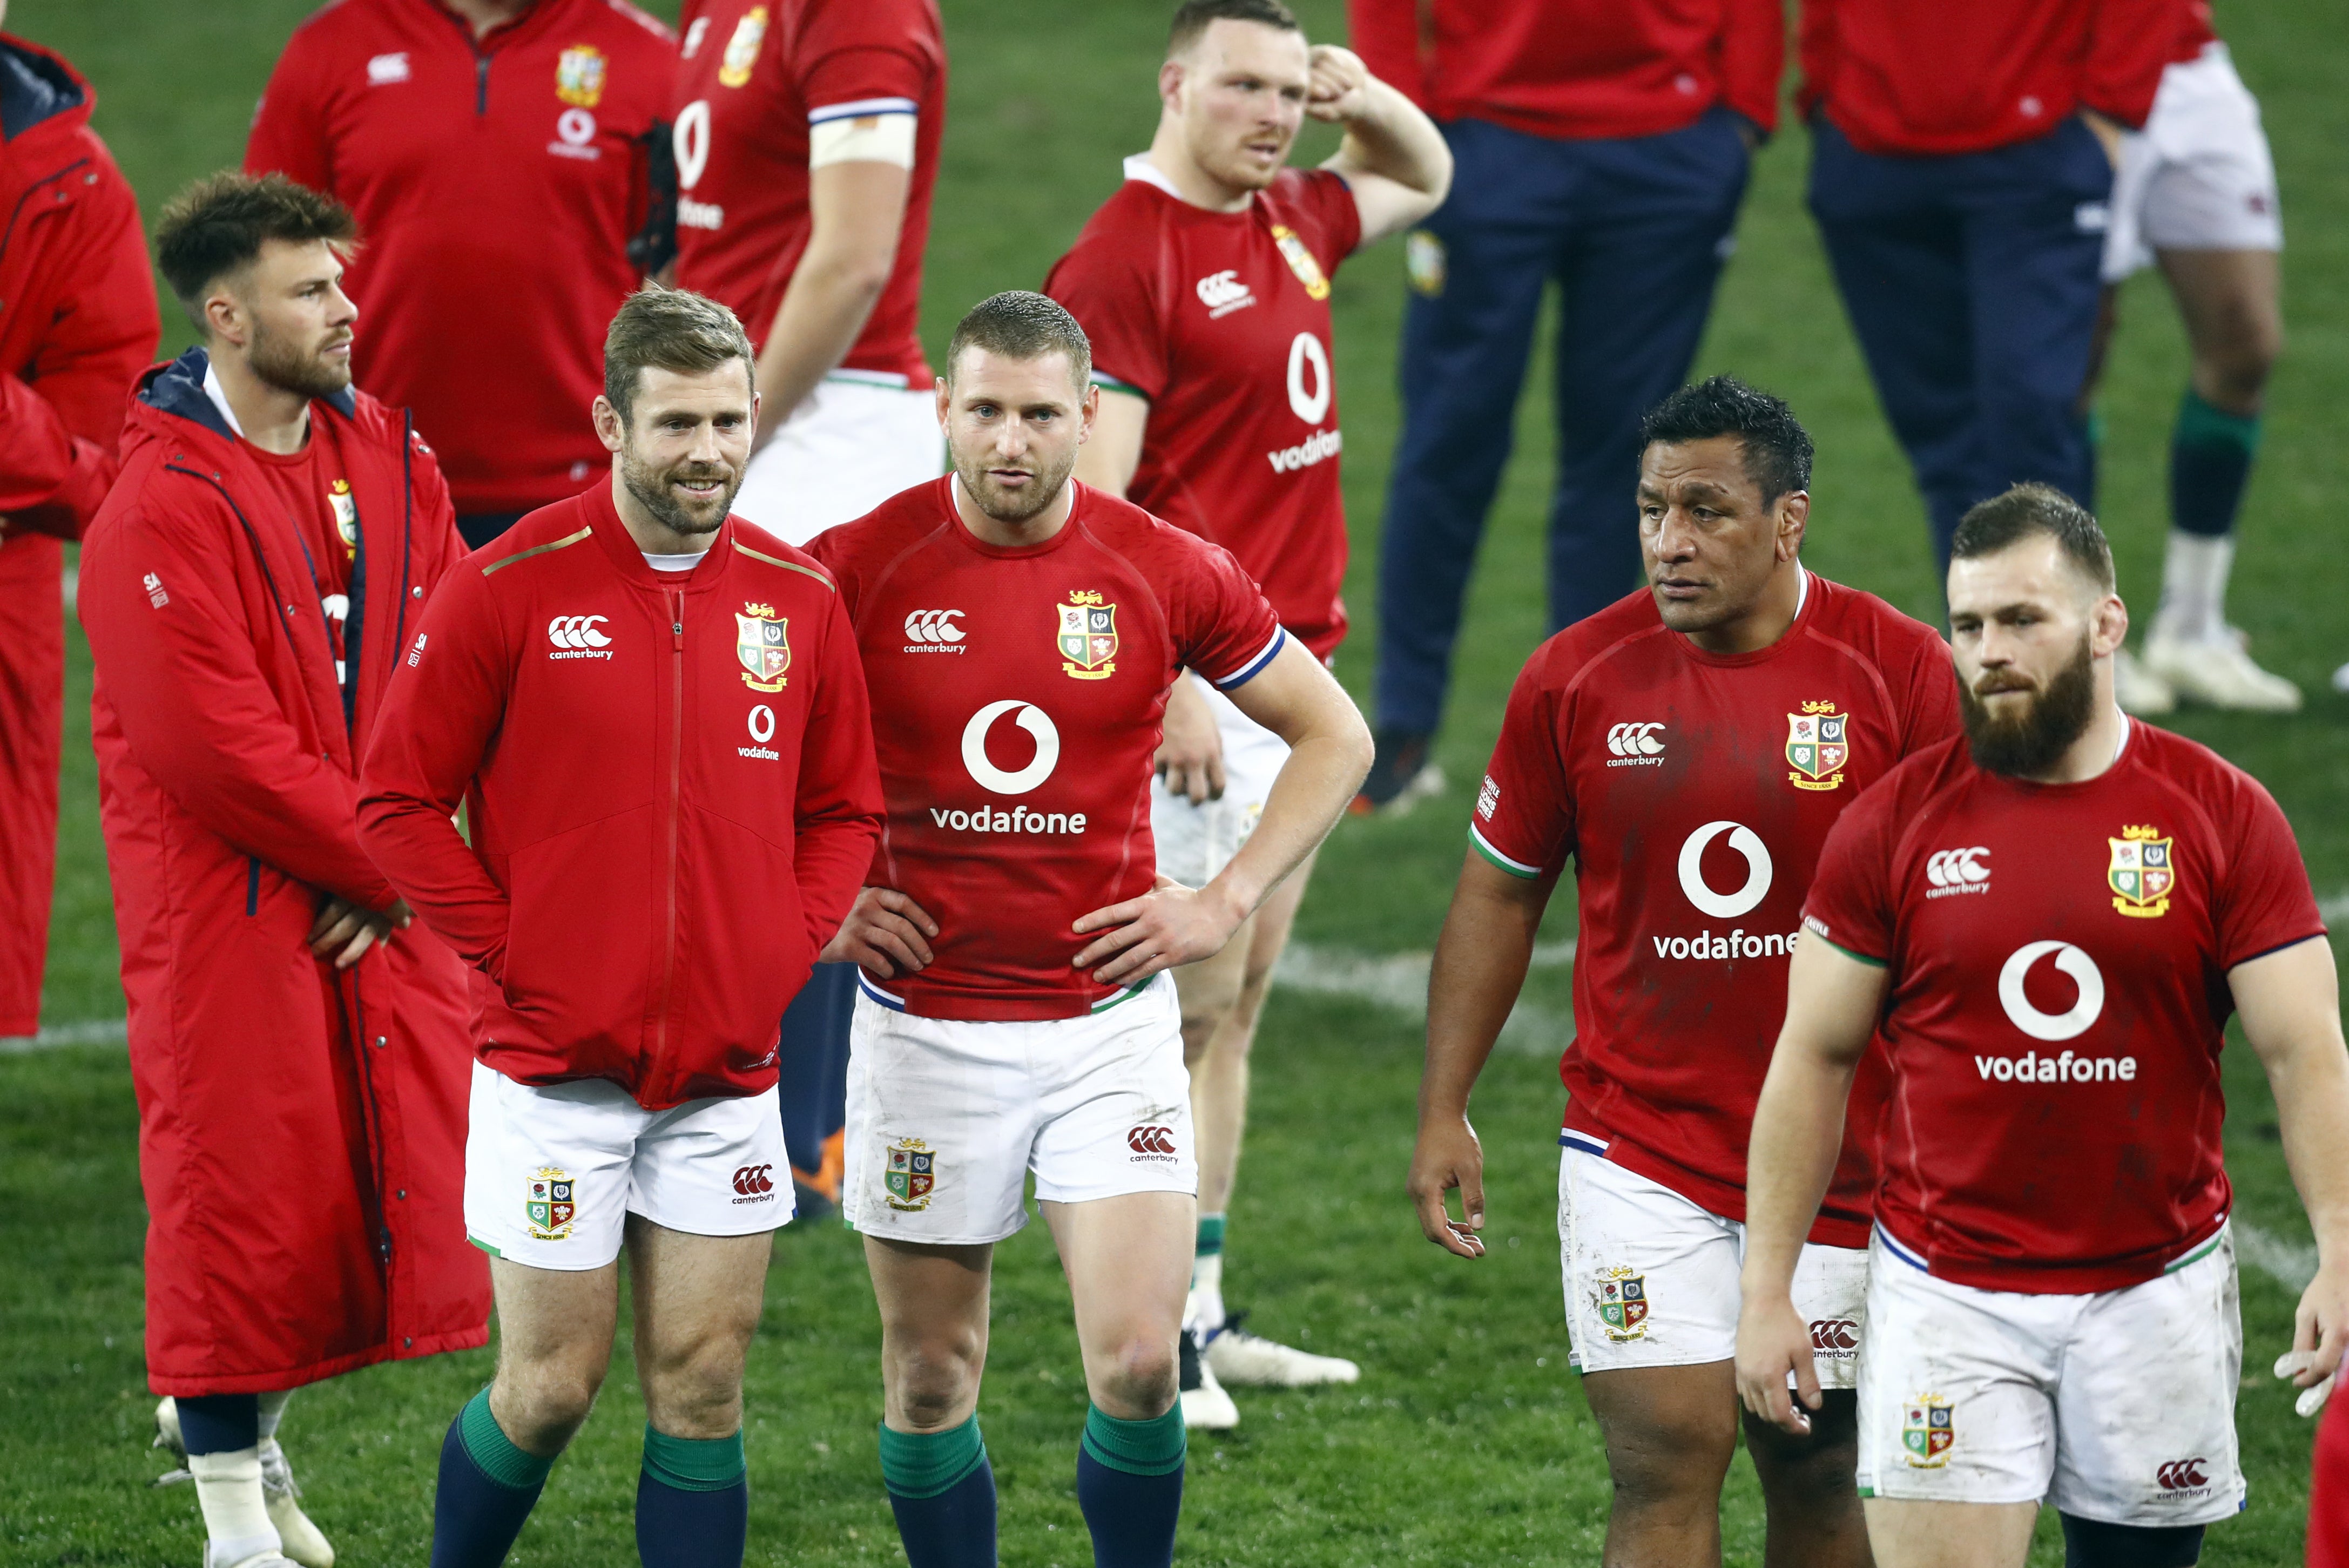 The British and Irish Lions were agonisingly defeated 19-16 in the deciding Test to lose the series to South Africa (Steve Haag/PA)